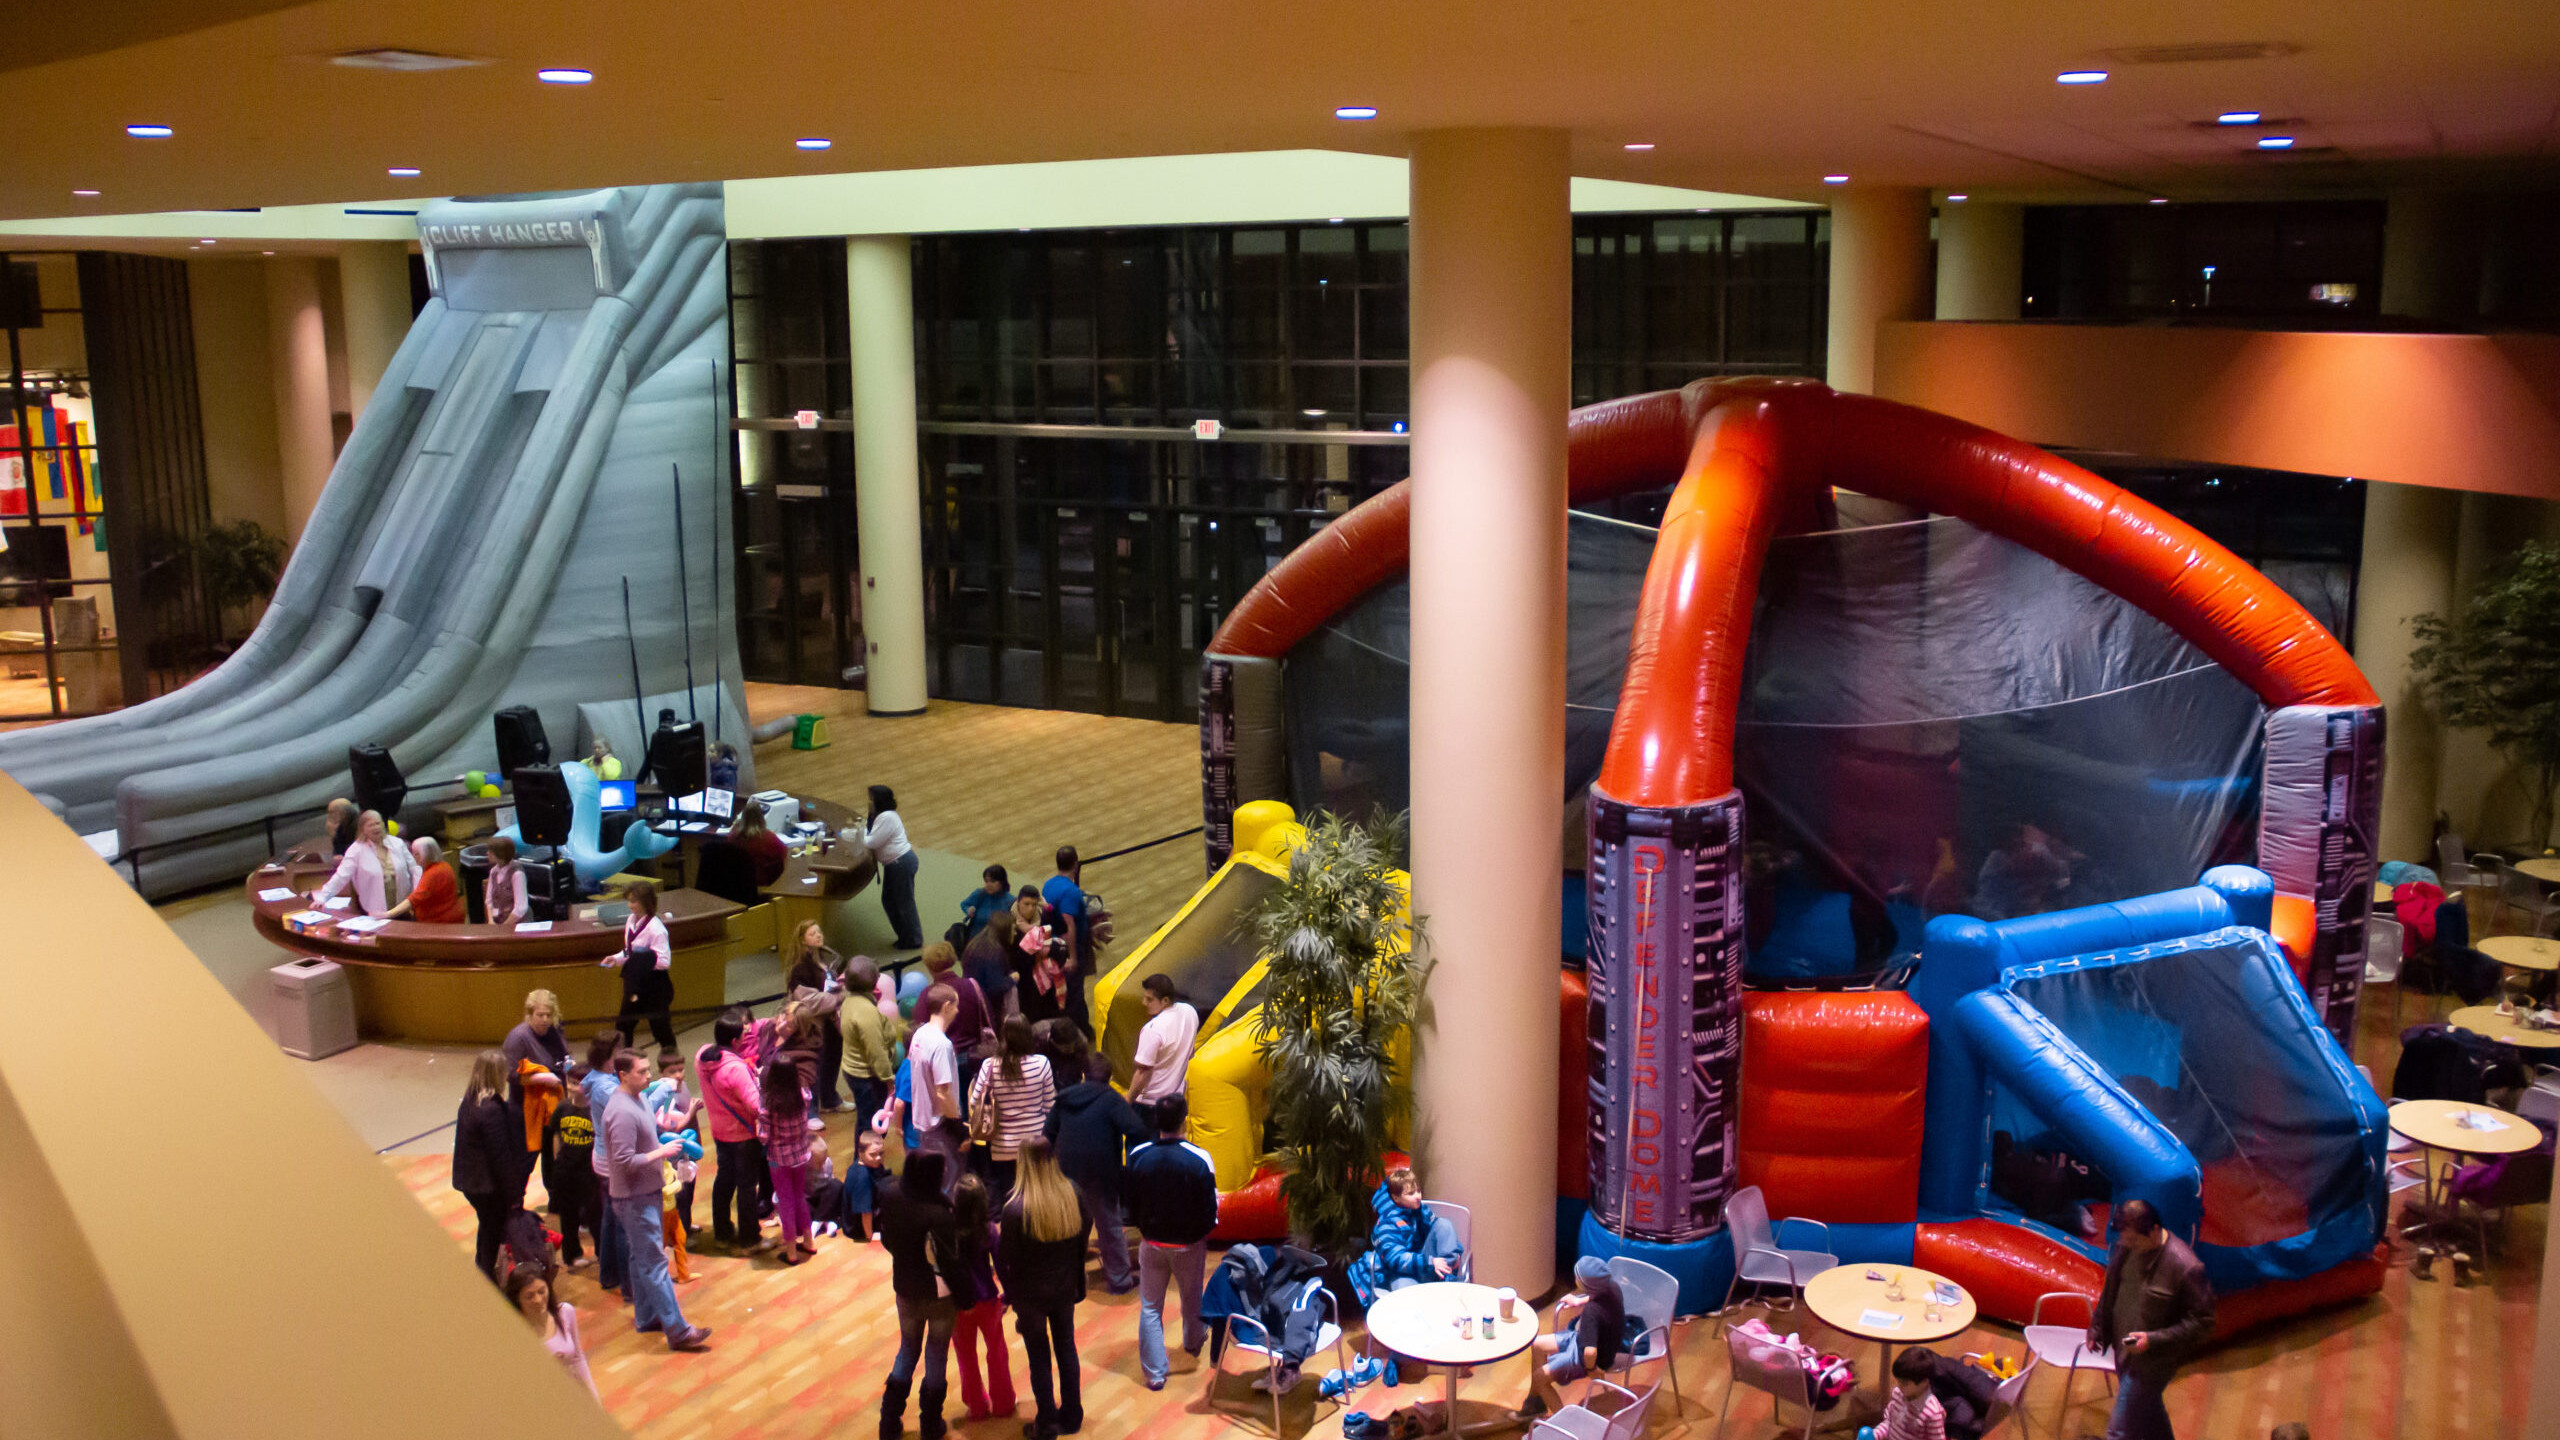 Overhead view of people inside a building talking and waiting in line to go into an inflatable soccer dome.